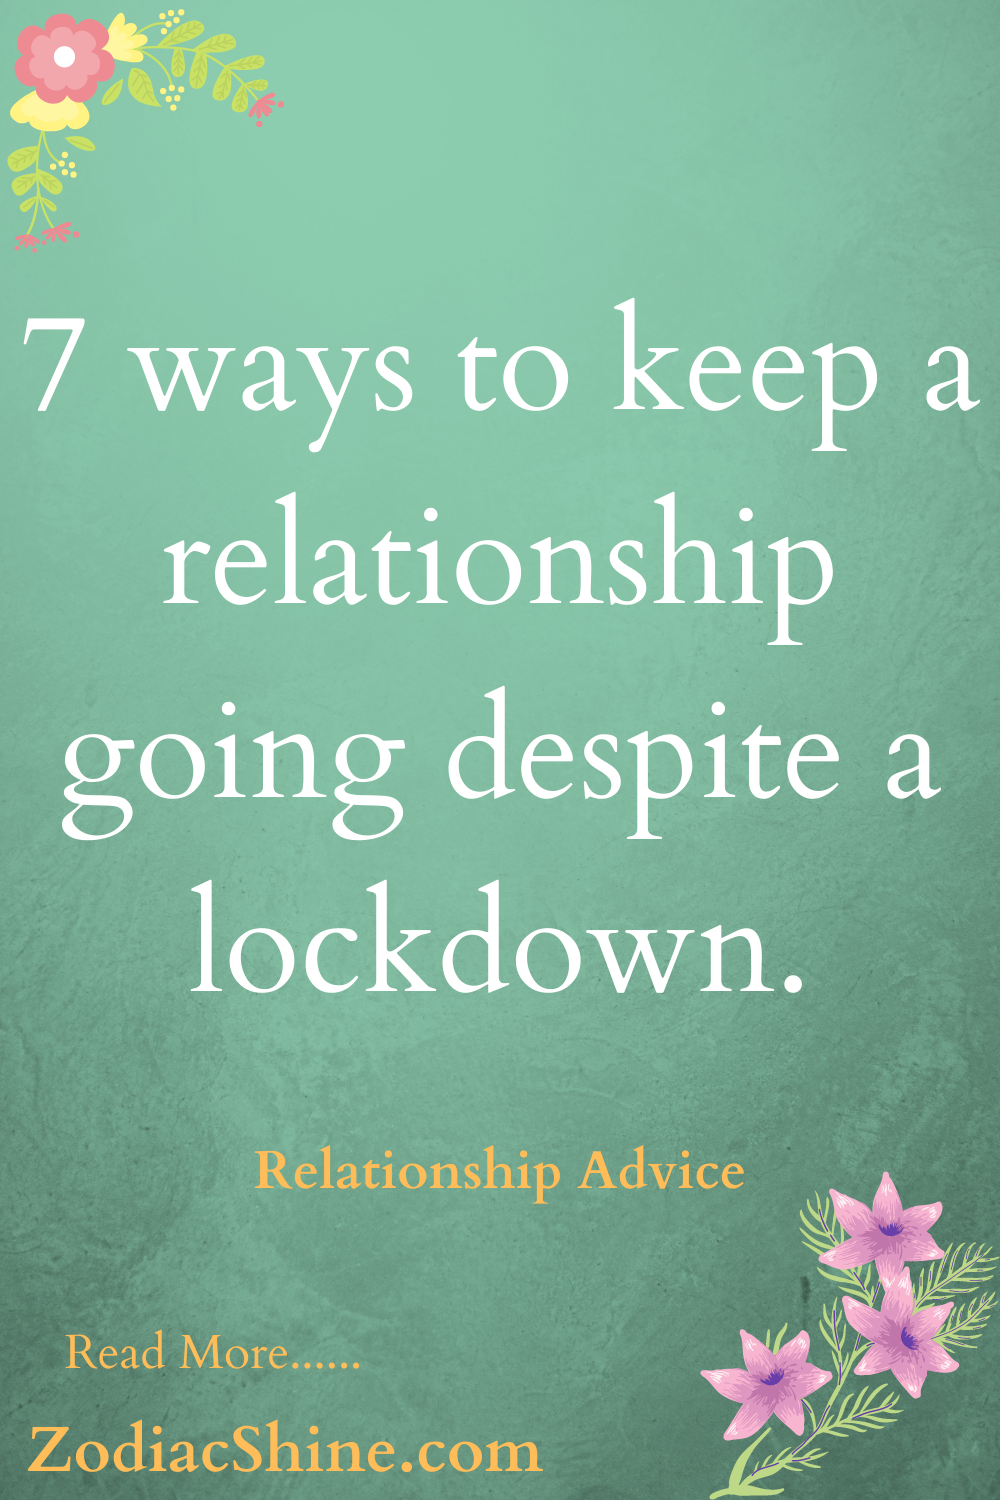 7 ways to keep a relationship going despite a lockdown.